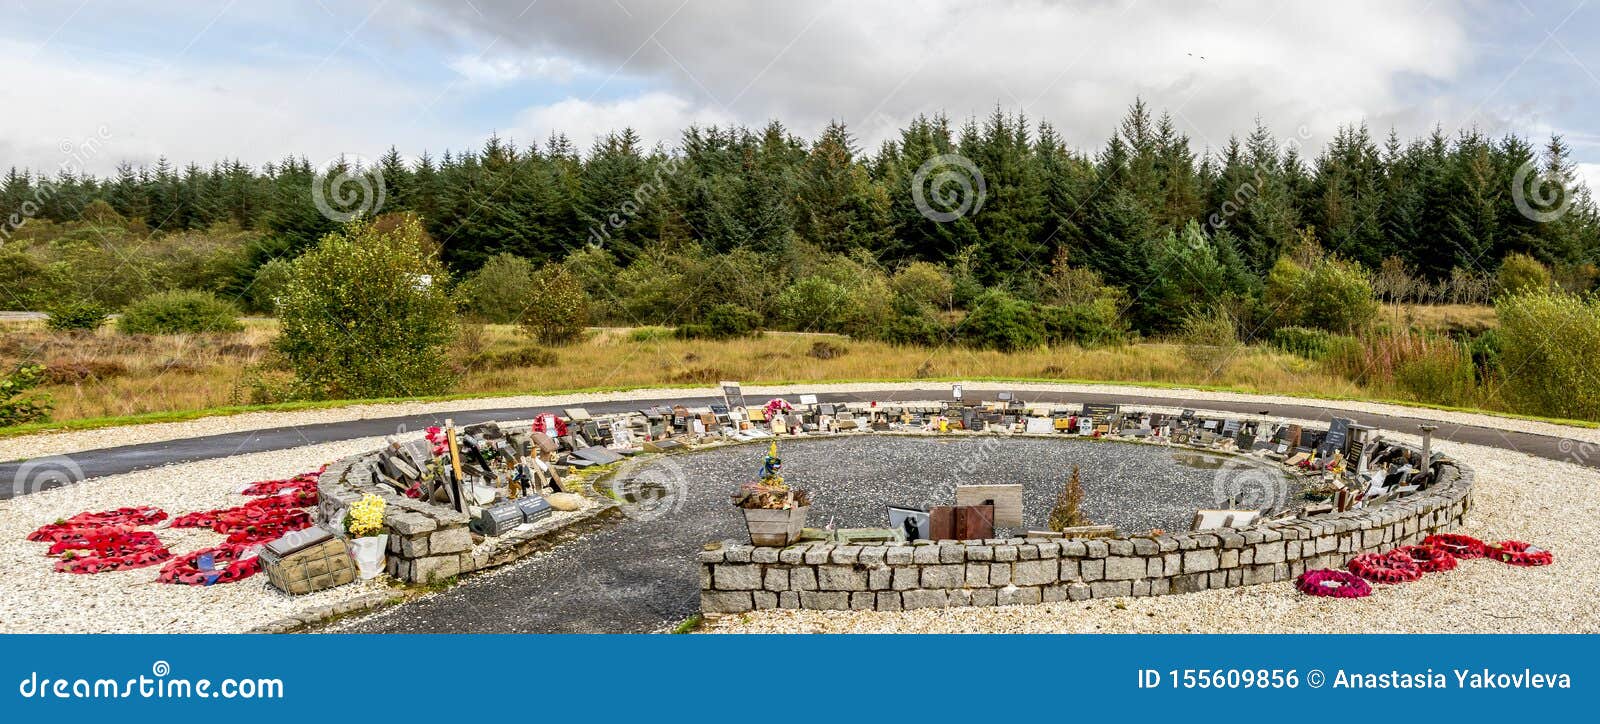 A Circle Shaped Garden Of Remembrance With Red Wreathes And